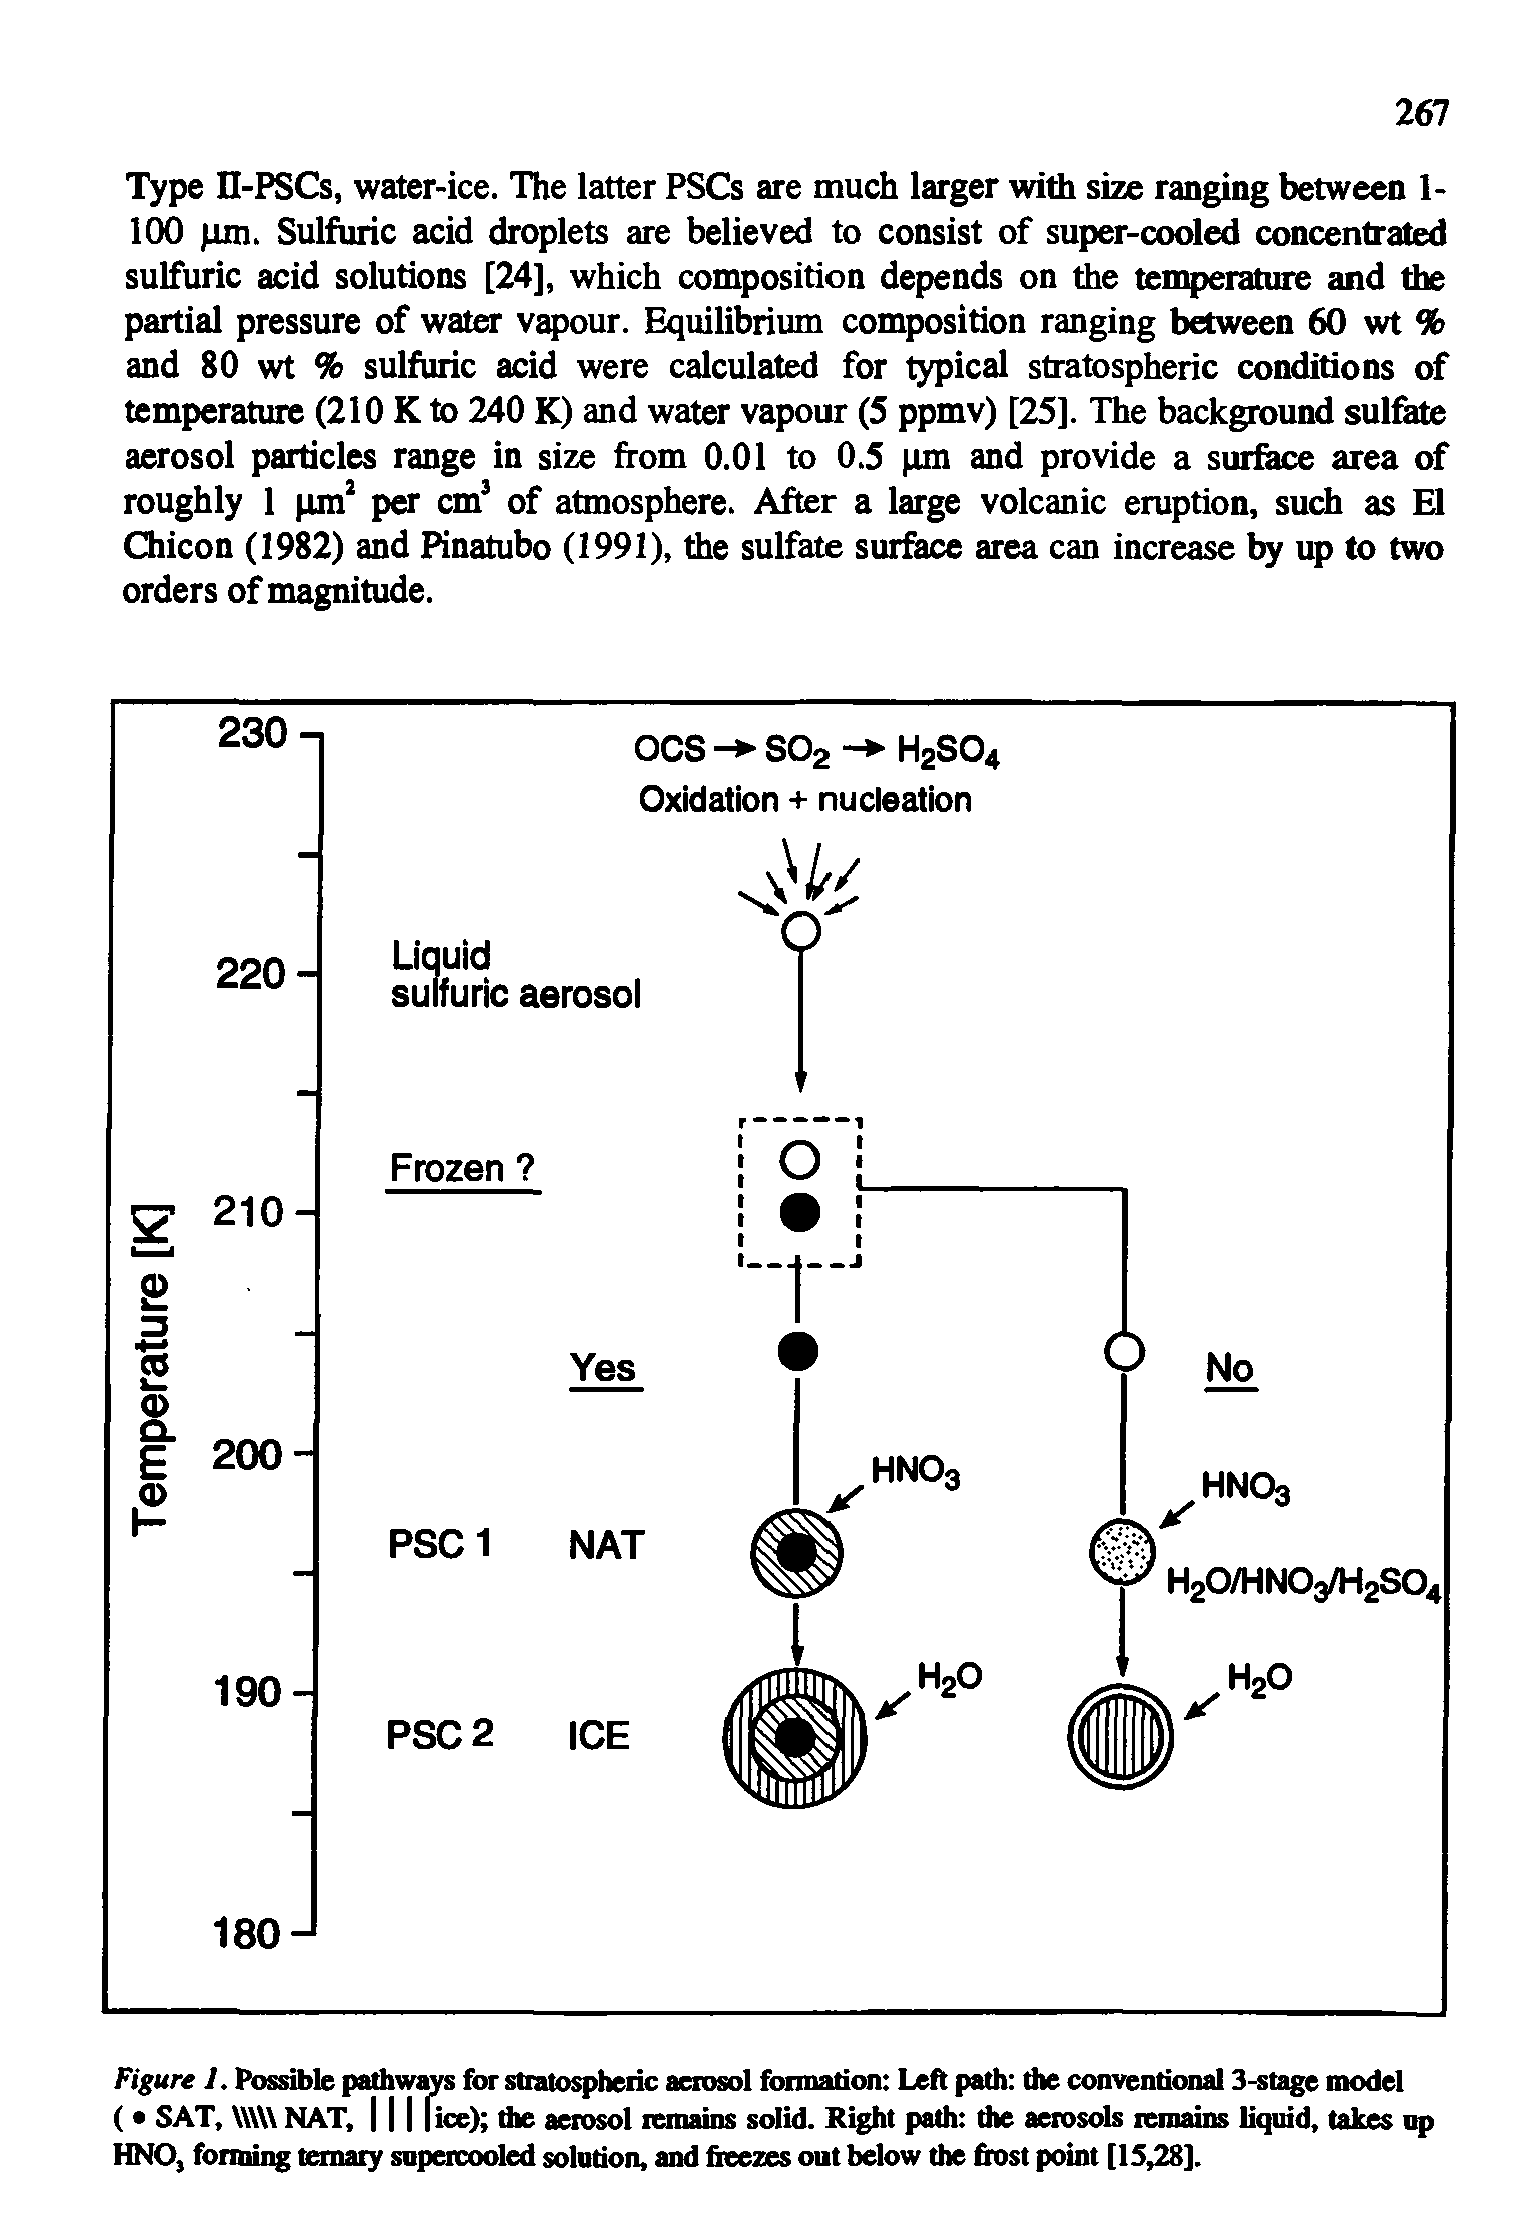 Figure J. Possible pathways for stratospheric aerosol formation Left path the conventional 3-stage model ( SAT, NAT, [ice) the aerosol remains solid. Right path the aerosols remains liquid, takes up HNOj forming ternary supercooled solution, and freezes out below the frost point [15,28].